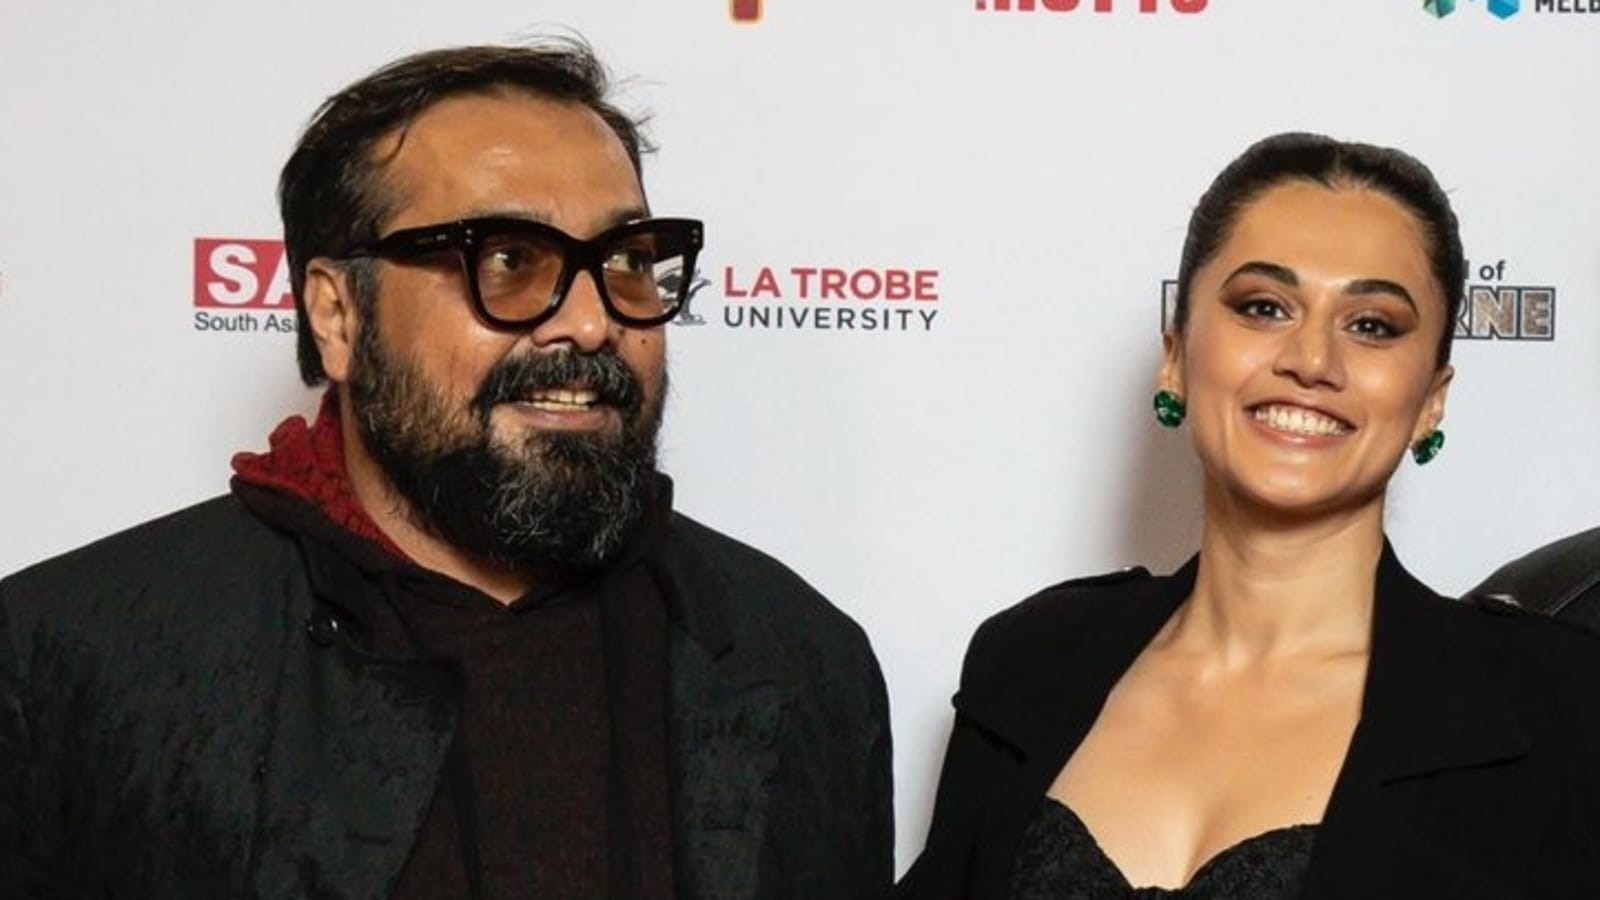 Taapsee Pannu Xxx Hd - Anurag Kashyap jokes about his body: 'I have bigger boobs than Taapsee Pannu'  | Bollywood - Hindustan Times